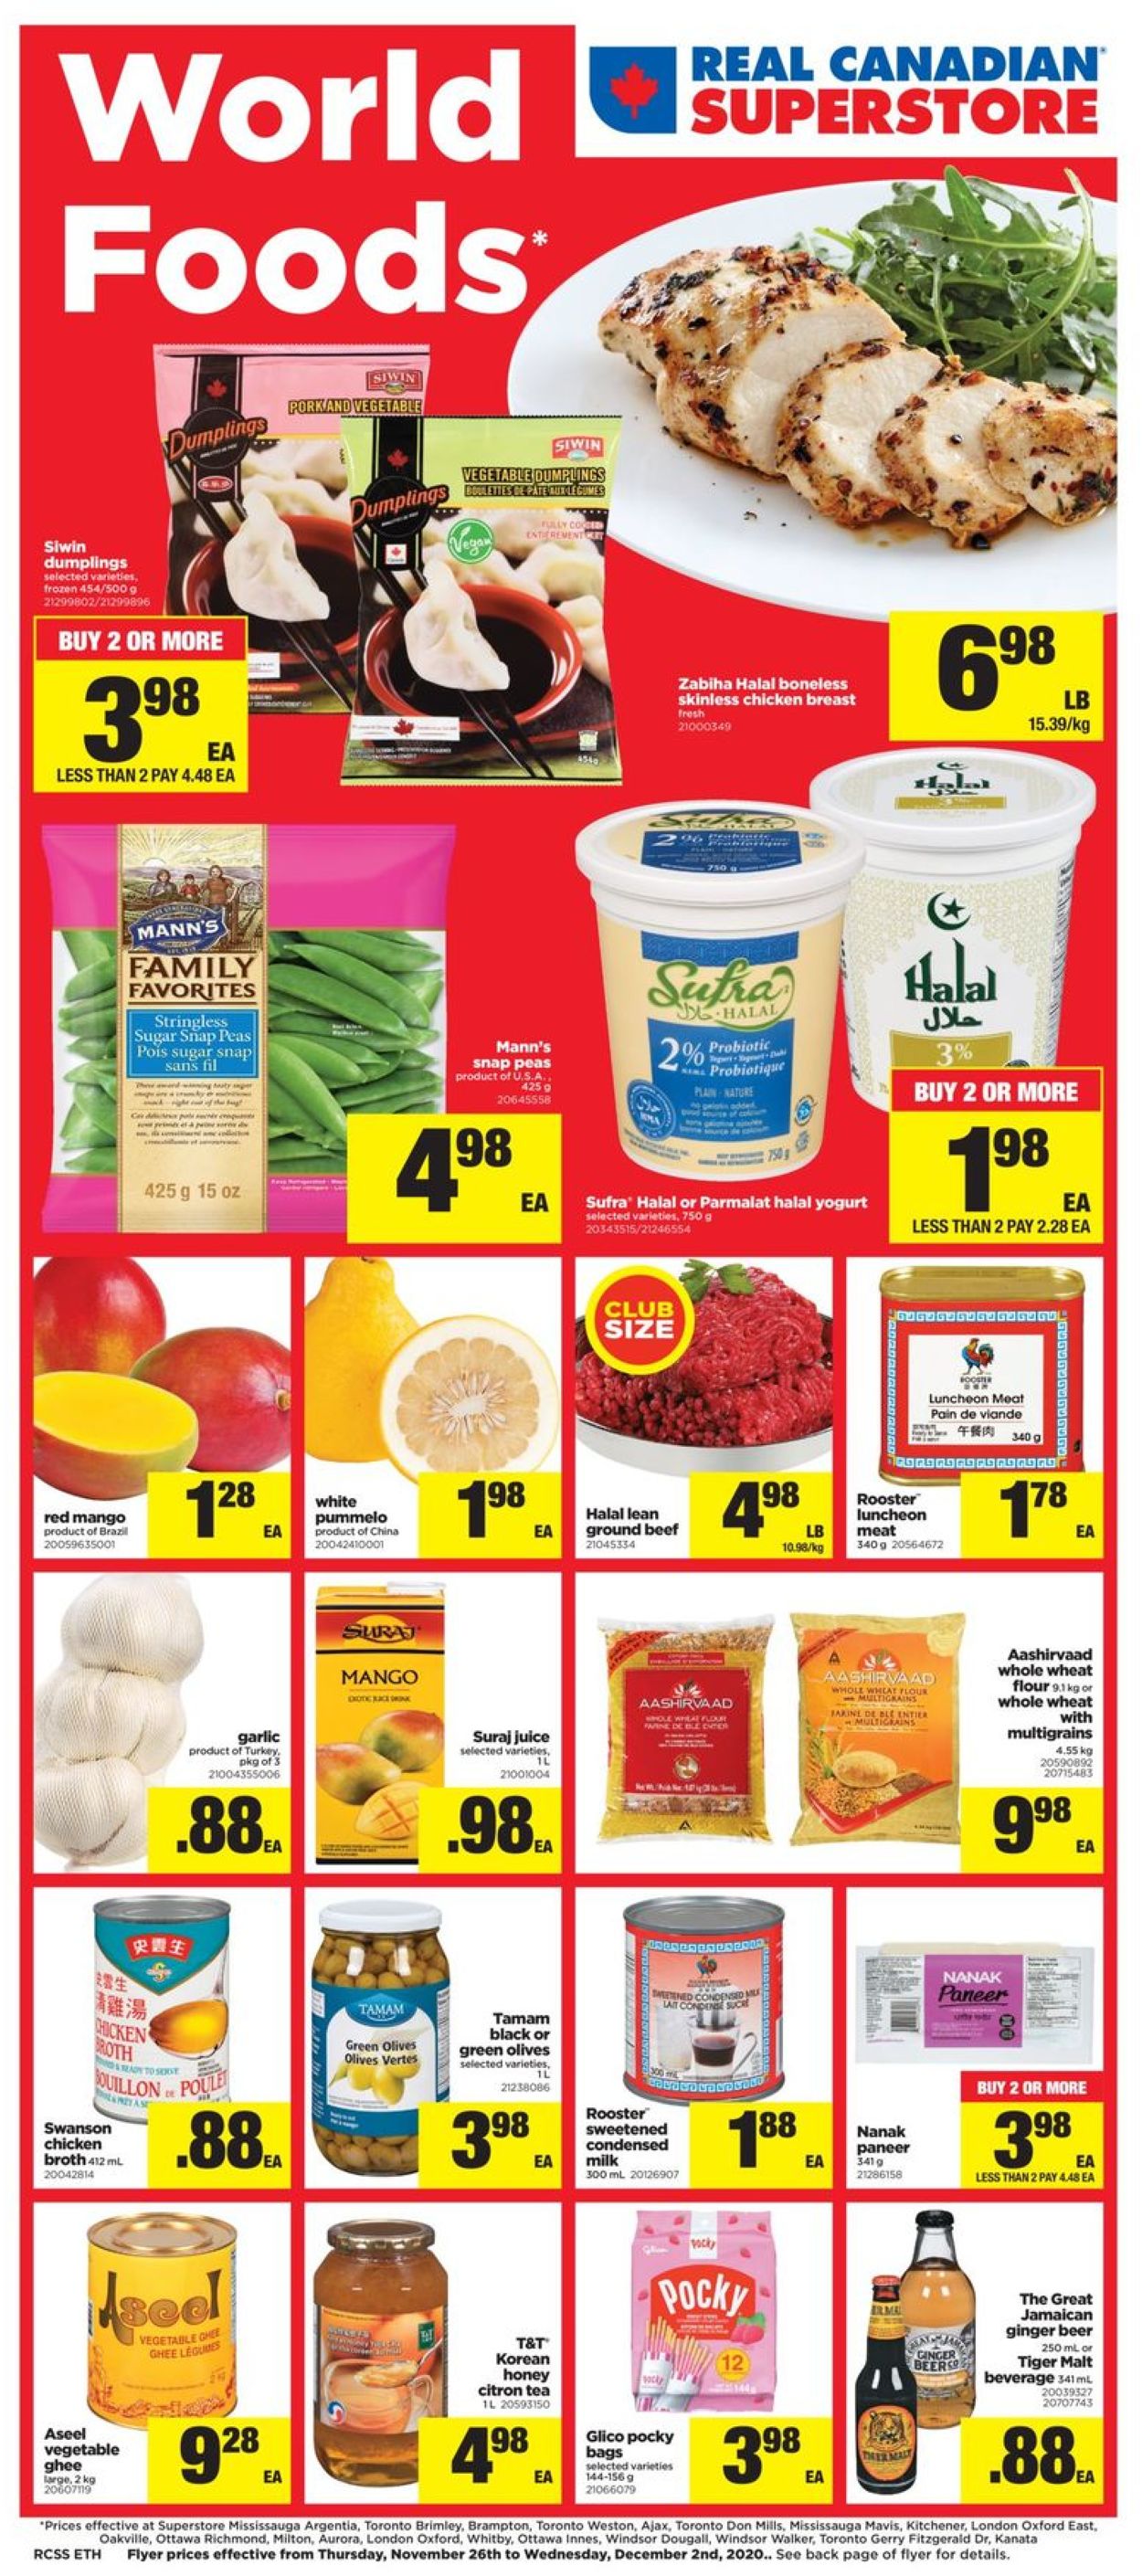 Real Canadian Superstore - Black Friday 2020 Flyer - 11/26-12/02/2020